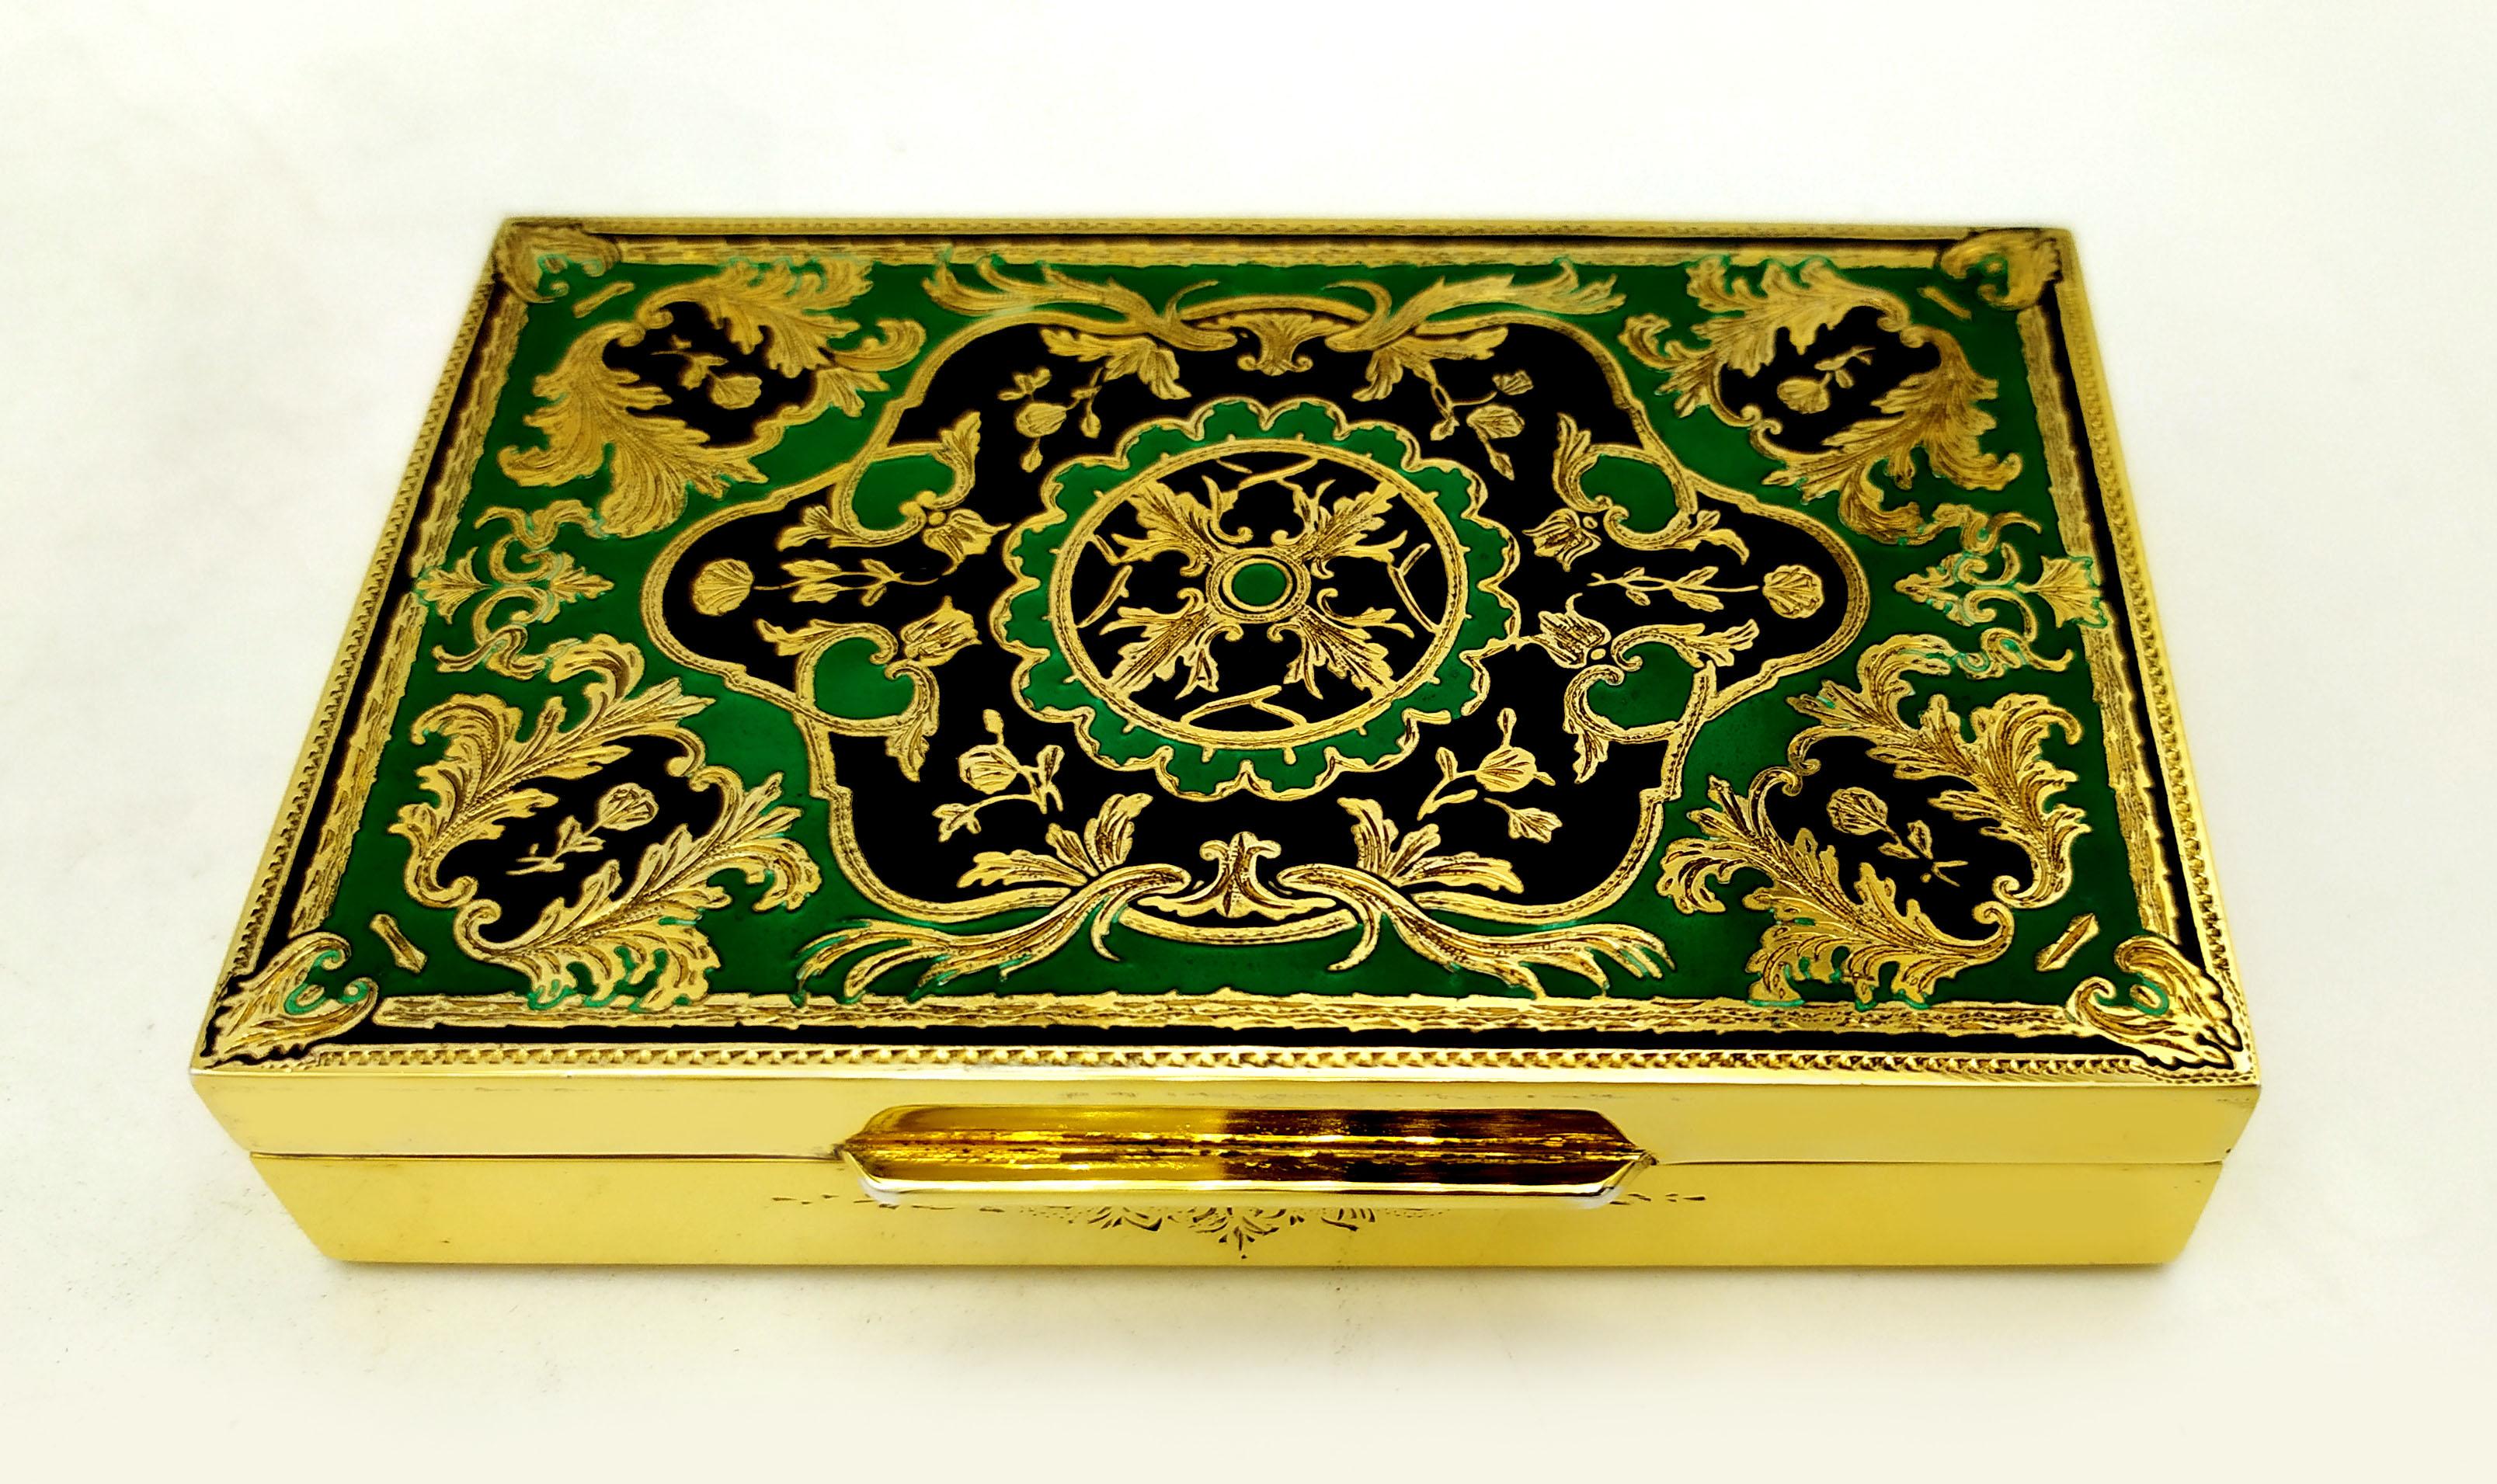 This awesome Table Box Baroque style is in 925/1000 sterling silver.
it has a Rectangular shape with hand-engraved intricate design Black and Green color fire enameled.
Table Box Baroque style is gold plated 24 carats.
External dimensions cm. 6.5 x